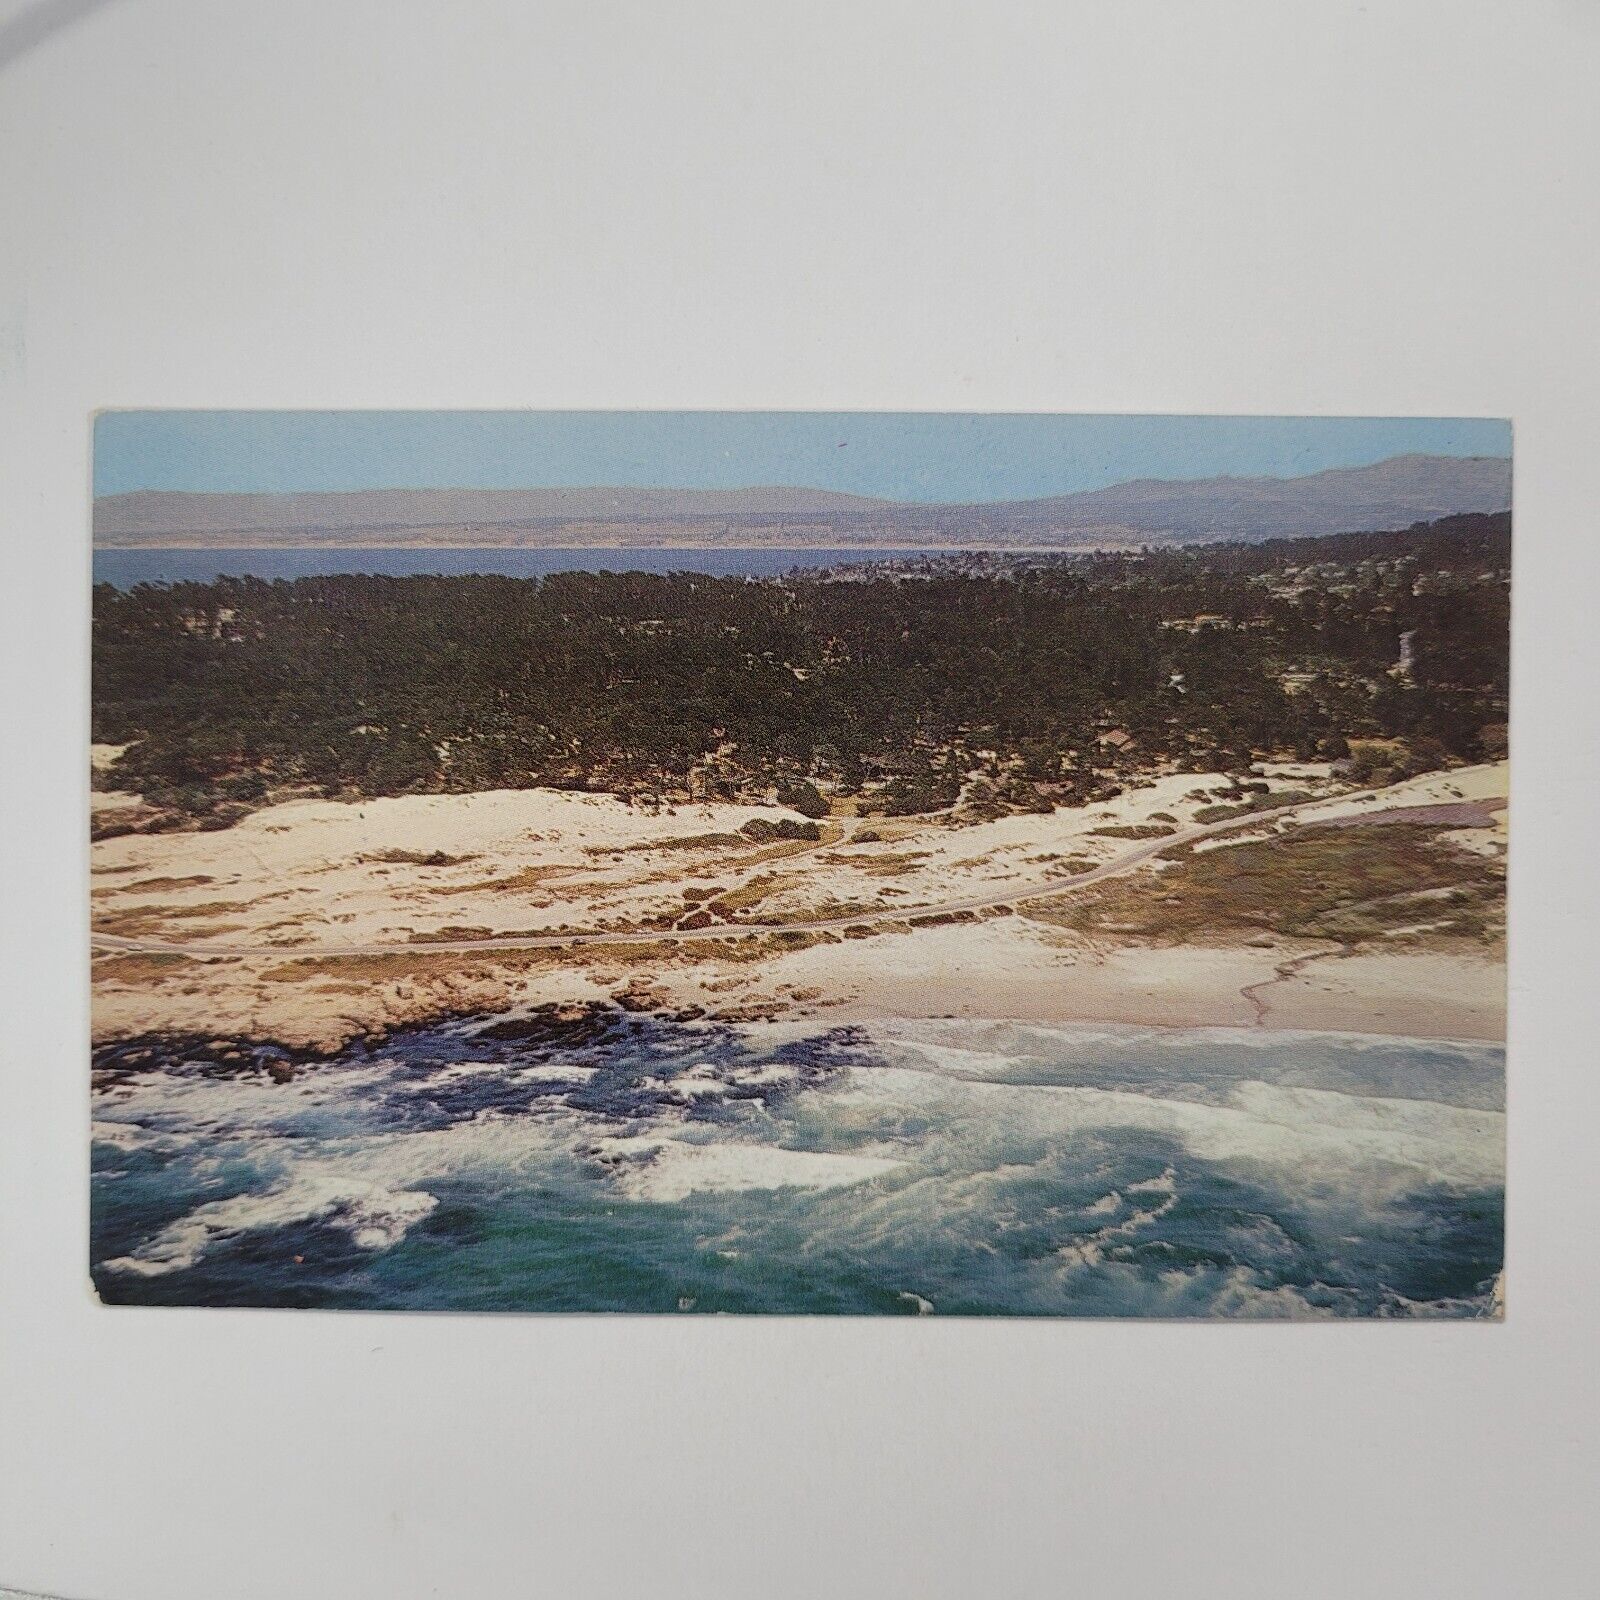 Asilomar Pacific Grove California Beach Postcard Posted Wave Highway Aerial View